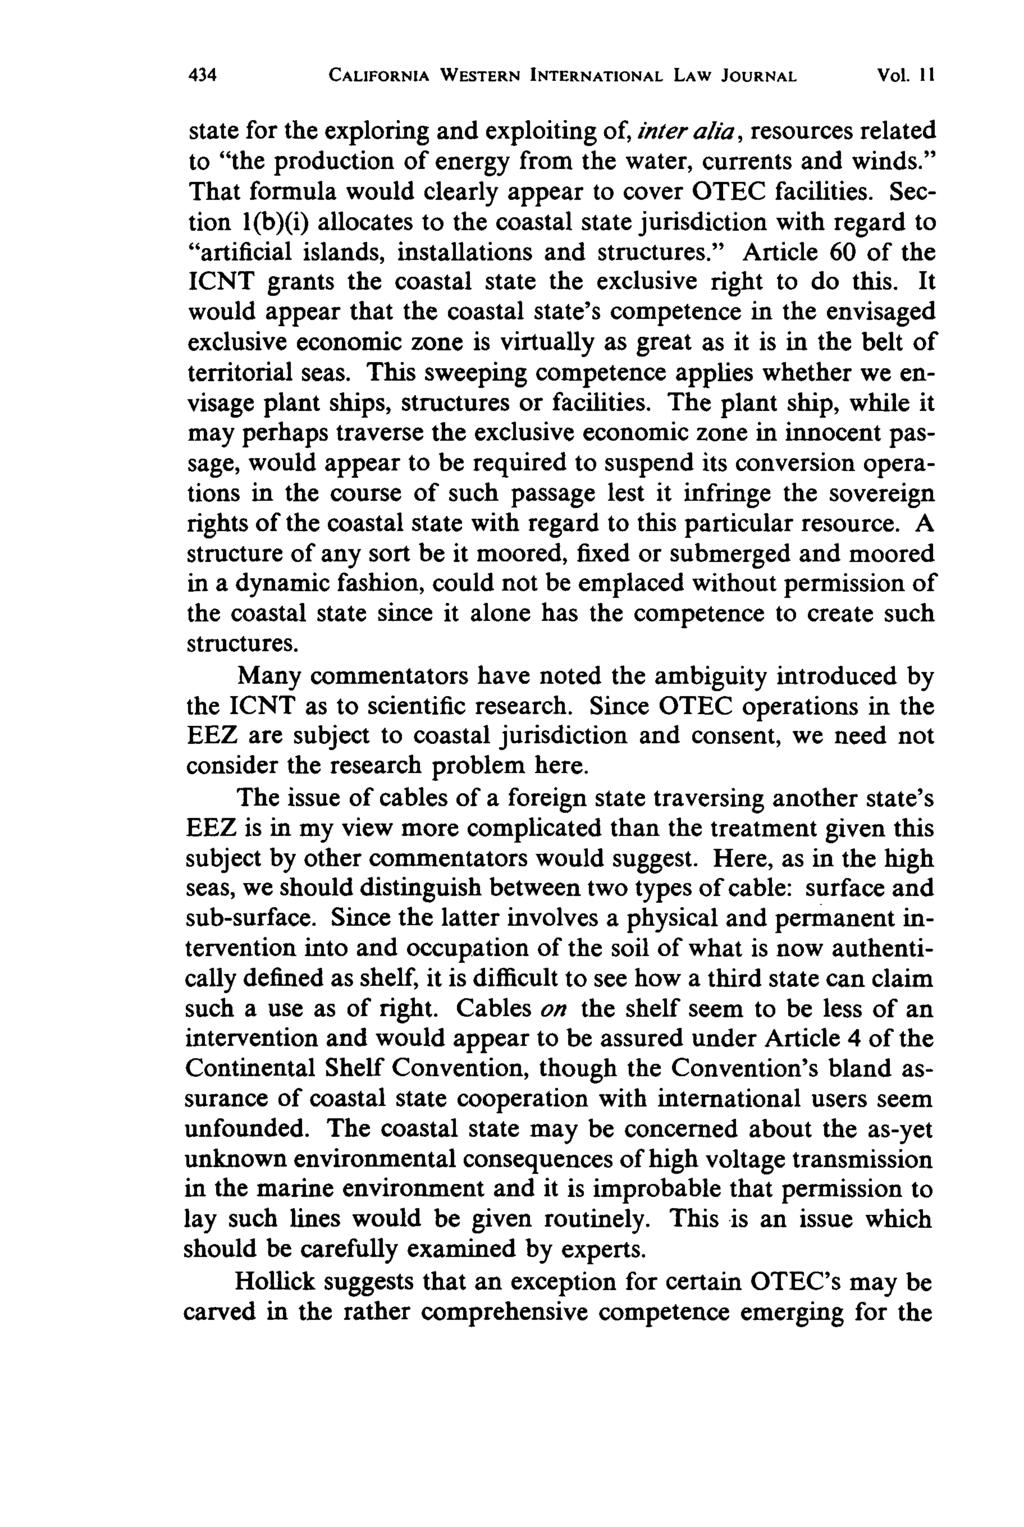 CALIFORNIA WESTERN INTERNATIONAL LAW JOURNAL Vol. I I state for the exploring and exploiting of, inter alia, resources related to "the production of energy from the water, currents and winds.